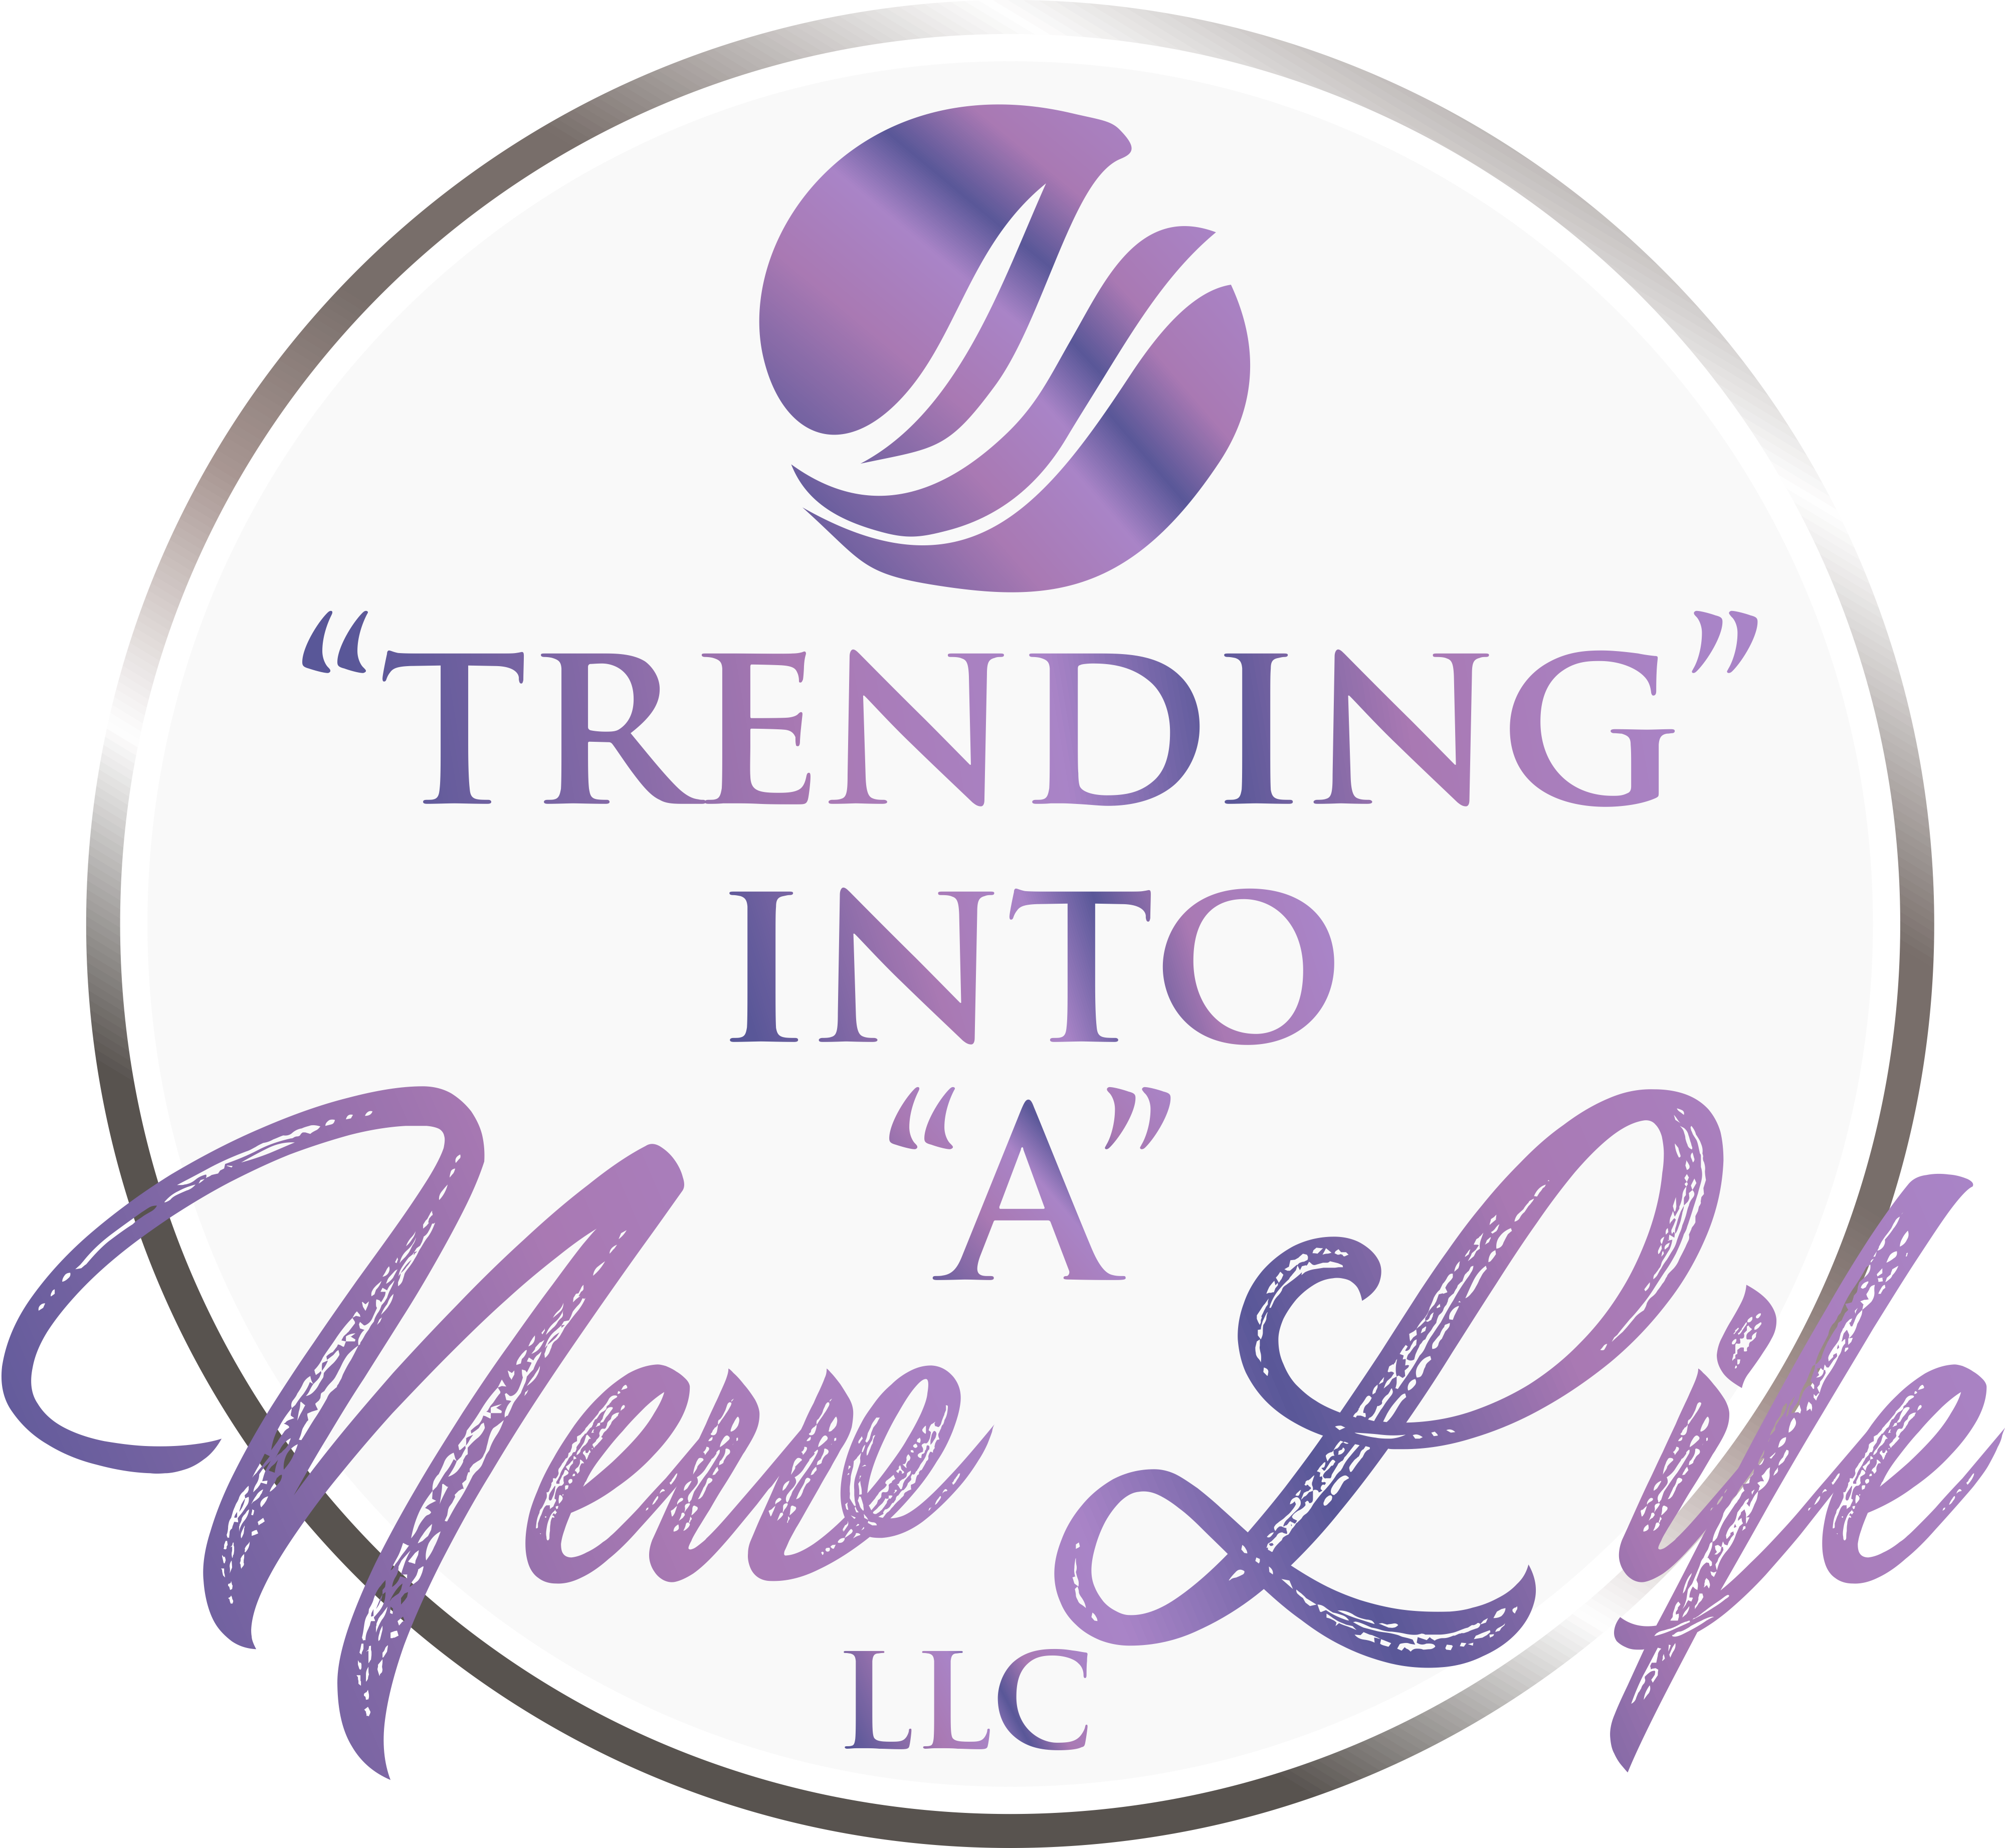 HOW TO BEGIN A NEW LIFE – Written by La Trenda S.Ross, Life Coach